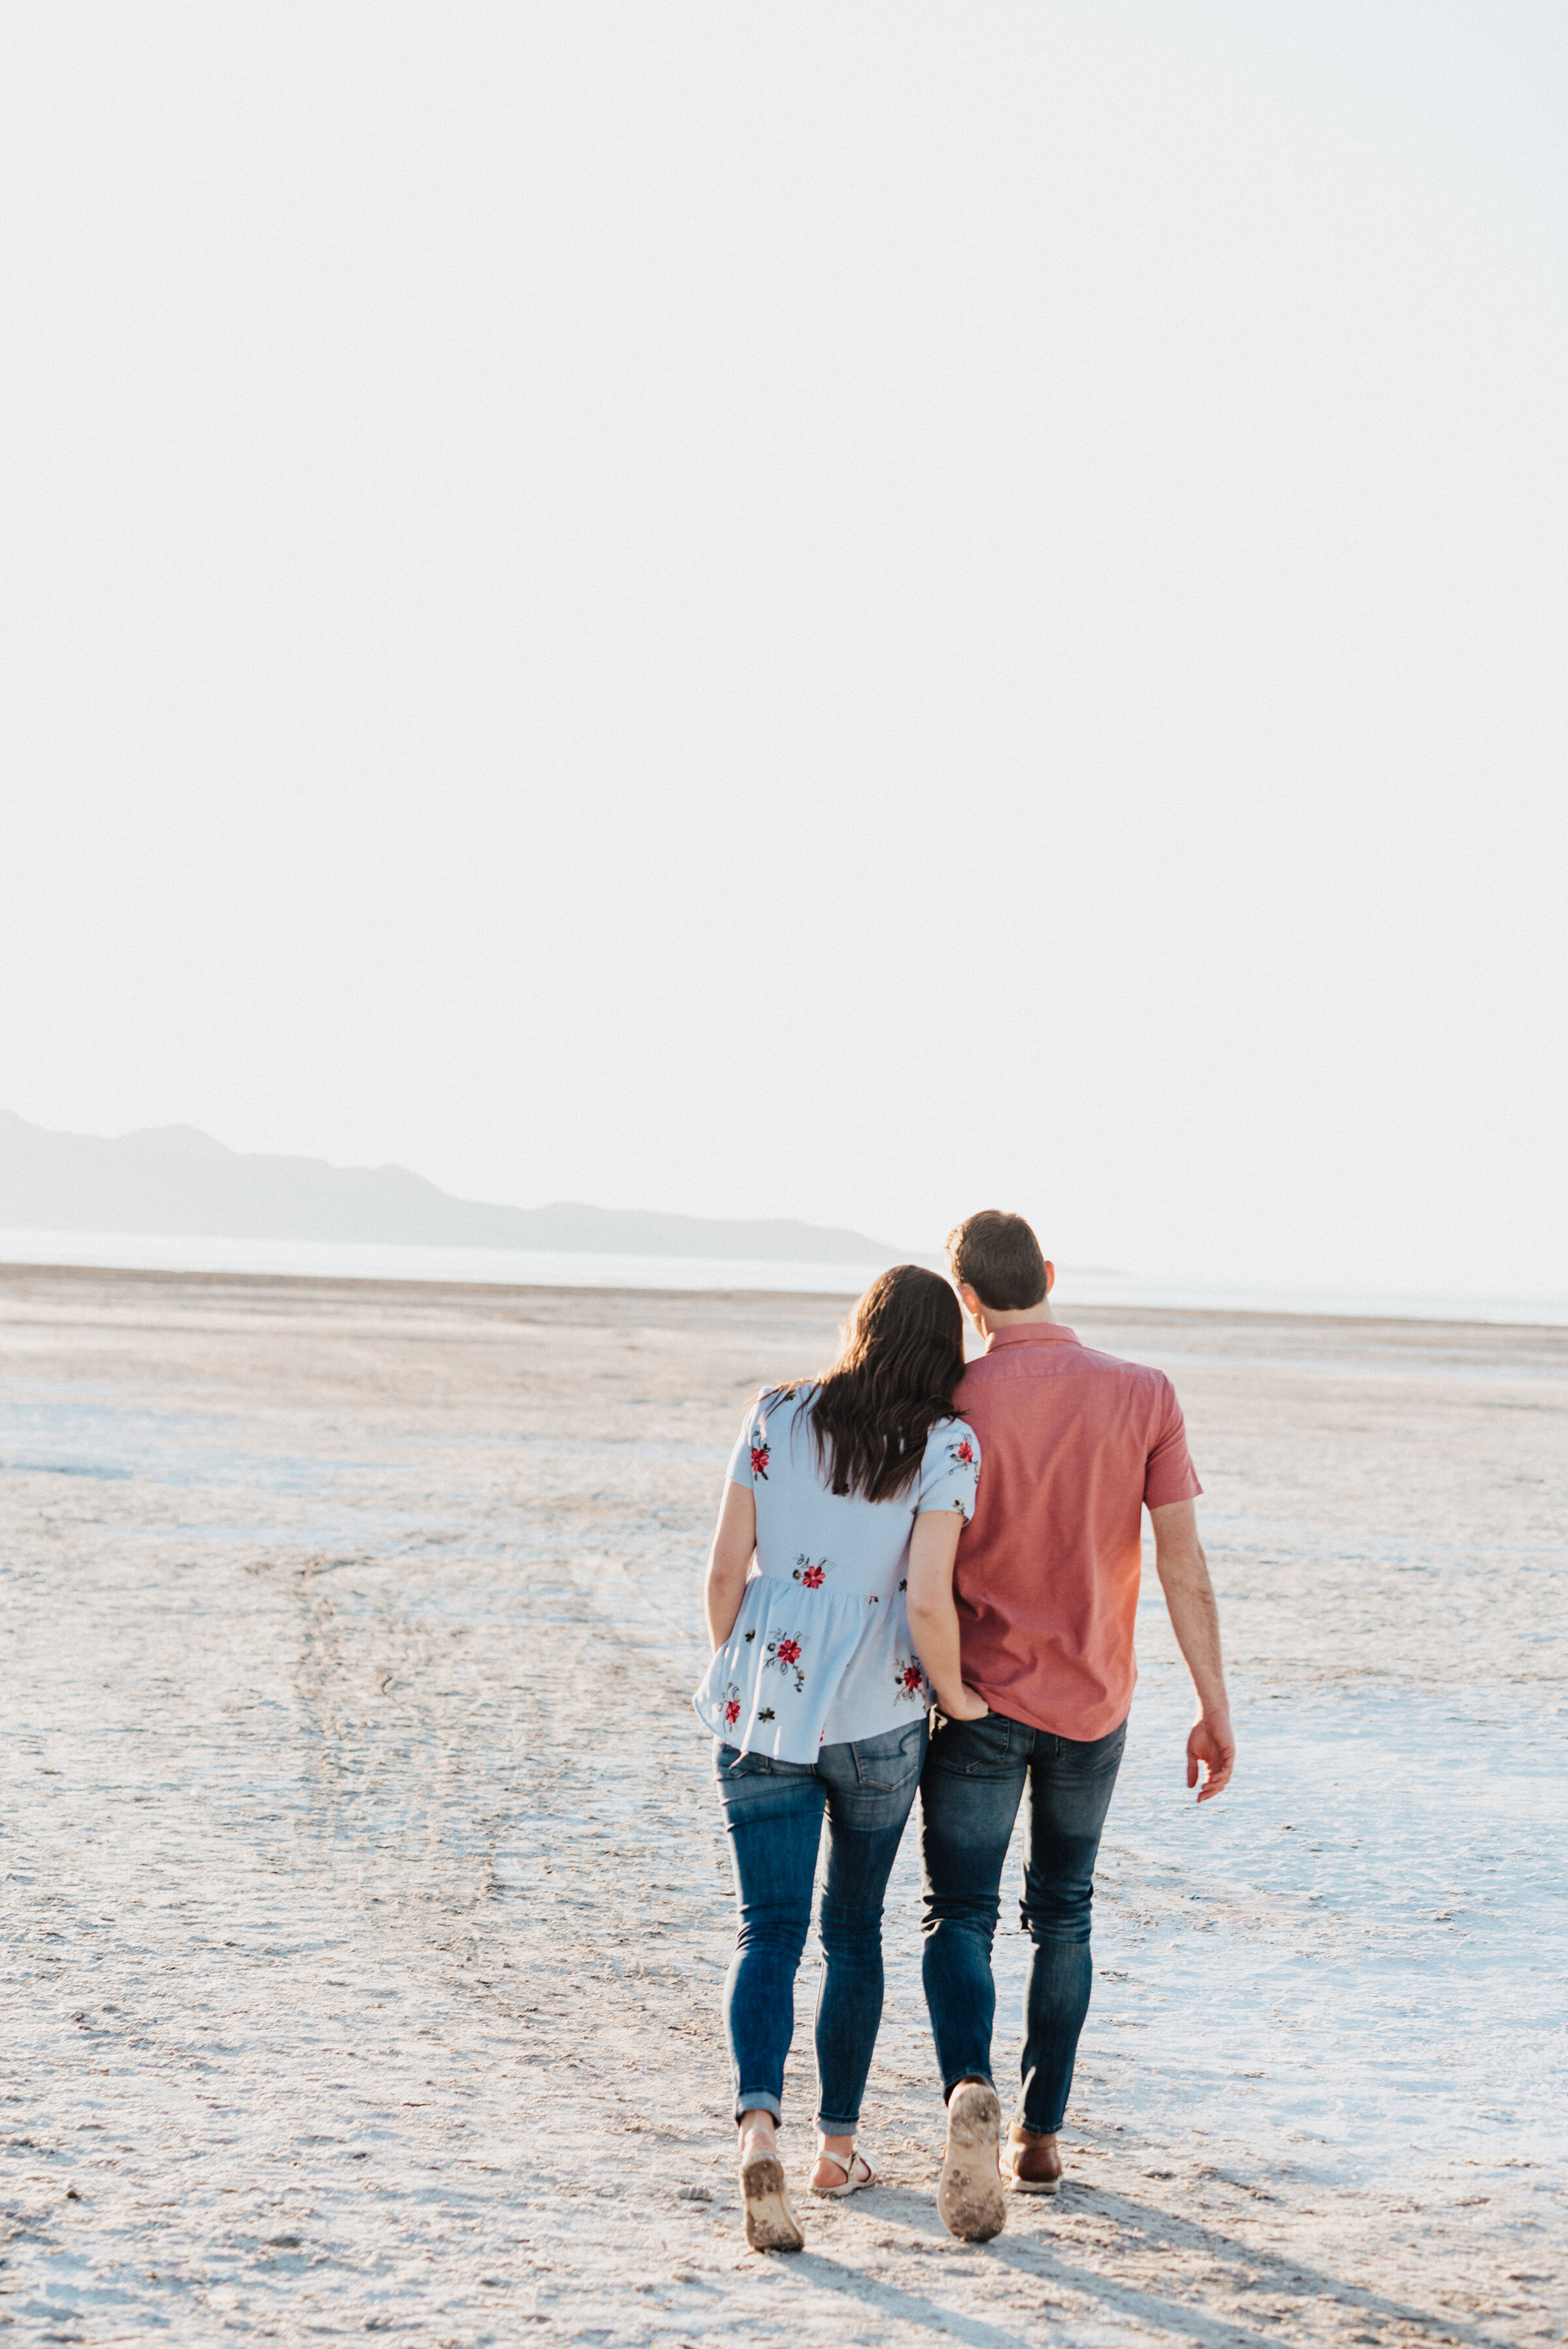  Couple looks across the salt flats in magna utah during their engagement photoshoot with Kristi Alyse Photography. Dry lake bed aesthetic magna utah photo locations outdoor nature engagement inspiration teal and coral matching outfits #kristialysephotography #tealandcoral #engagementphotoshoot #engagements #photoinspo #saltflats #utahphotography #outdoorphotography #naturephotography #natureinspo 